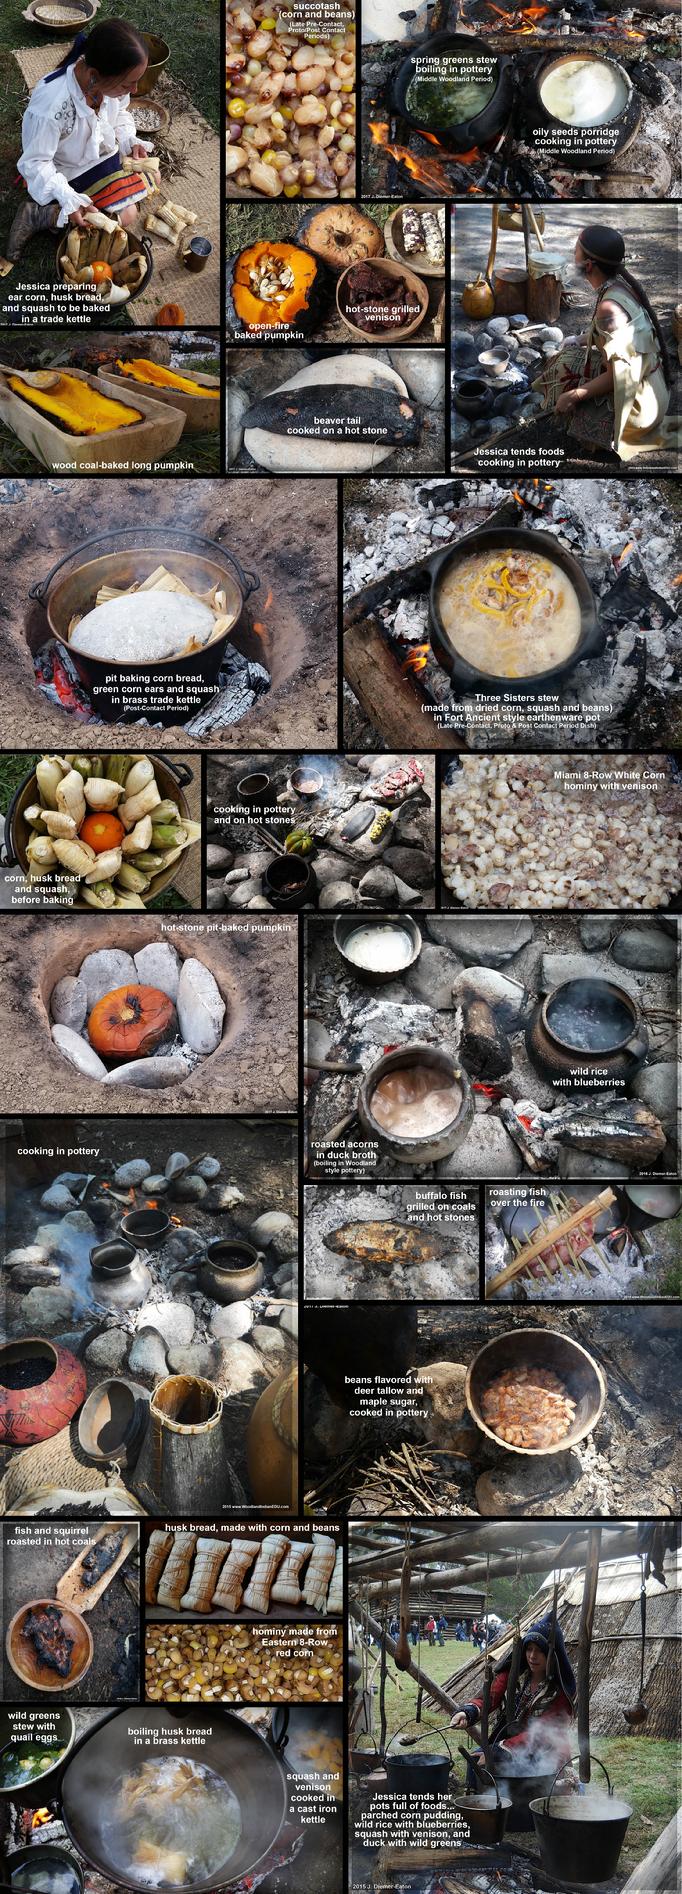 Native American Indian Cooking Foodways